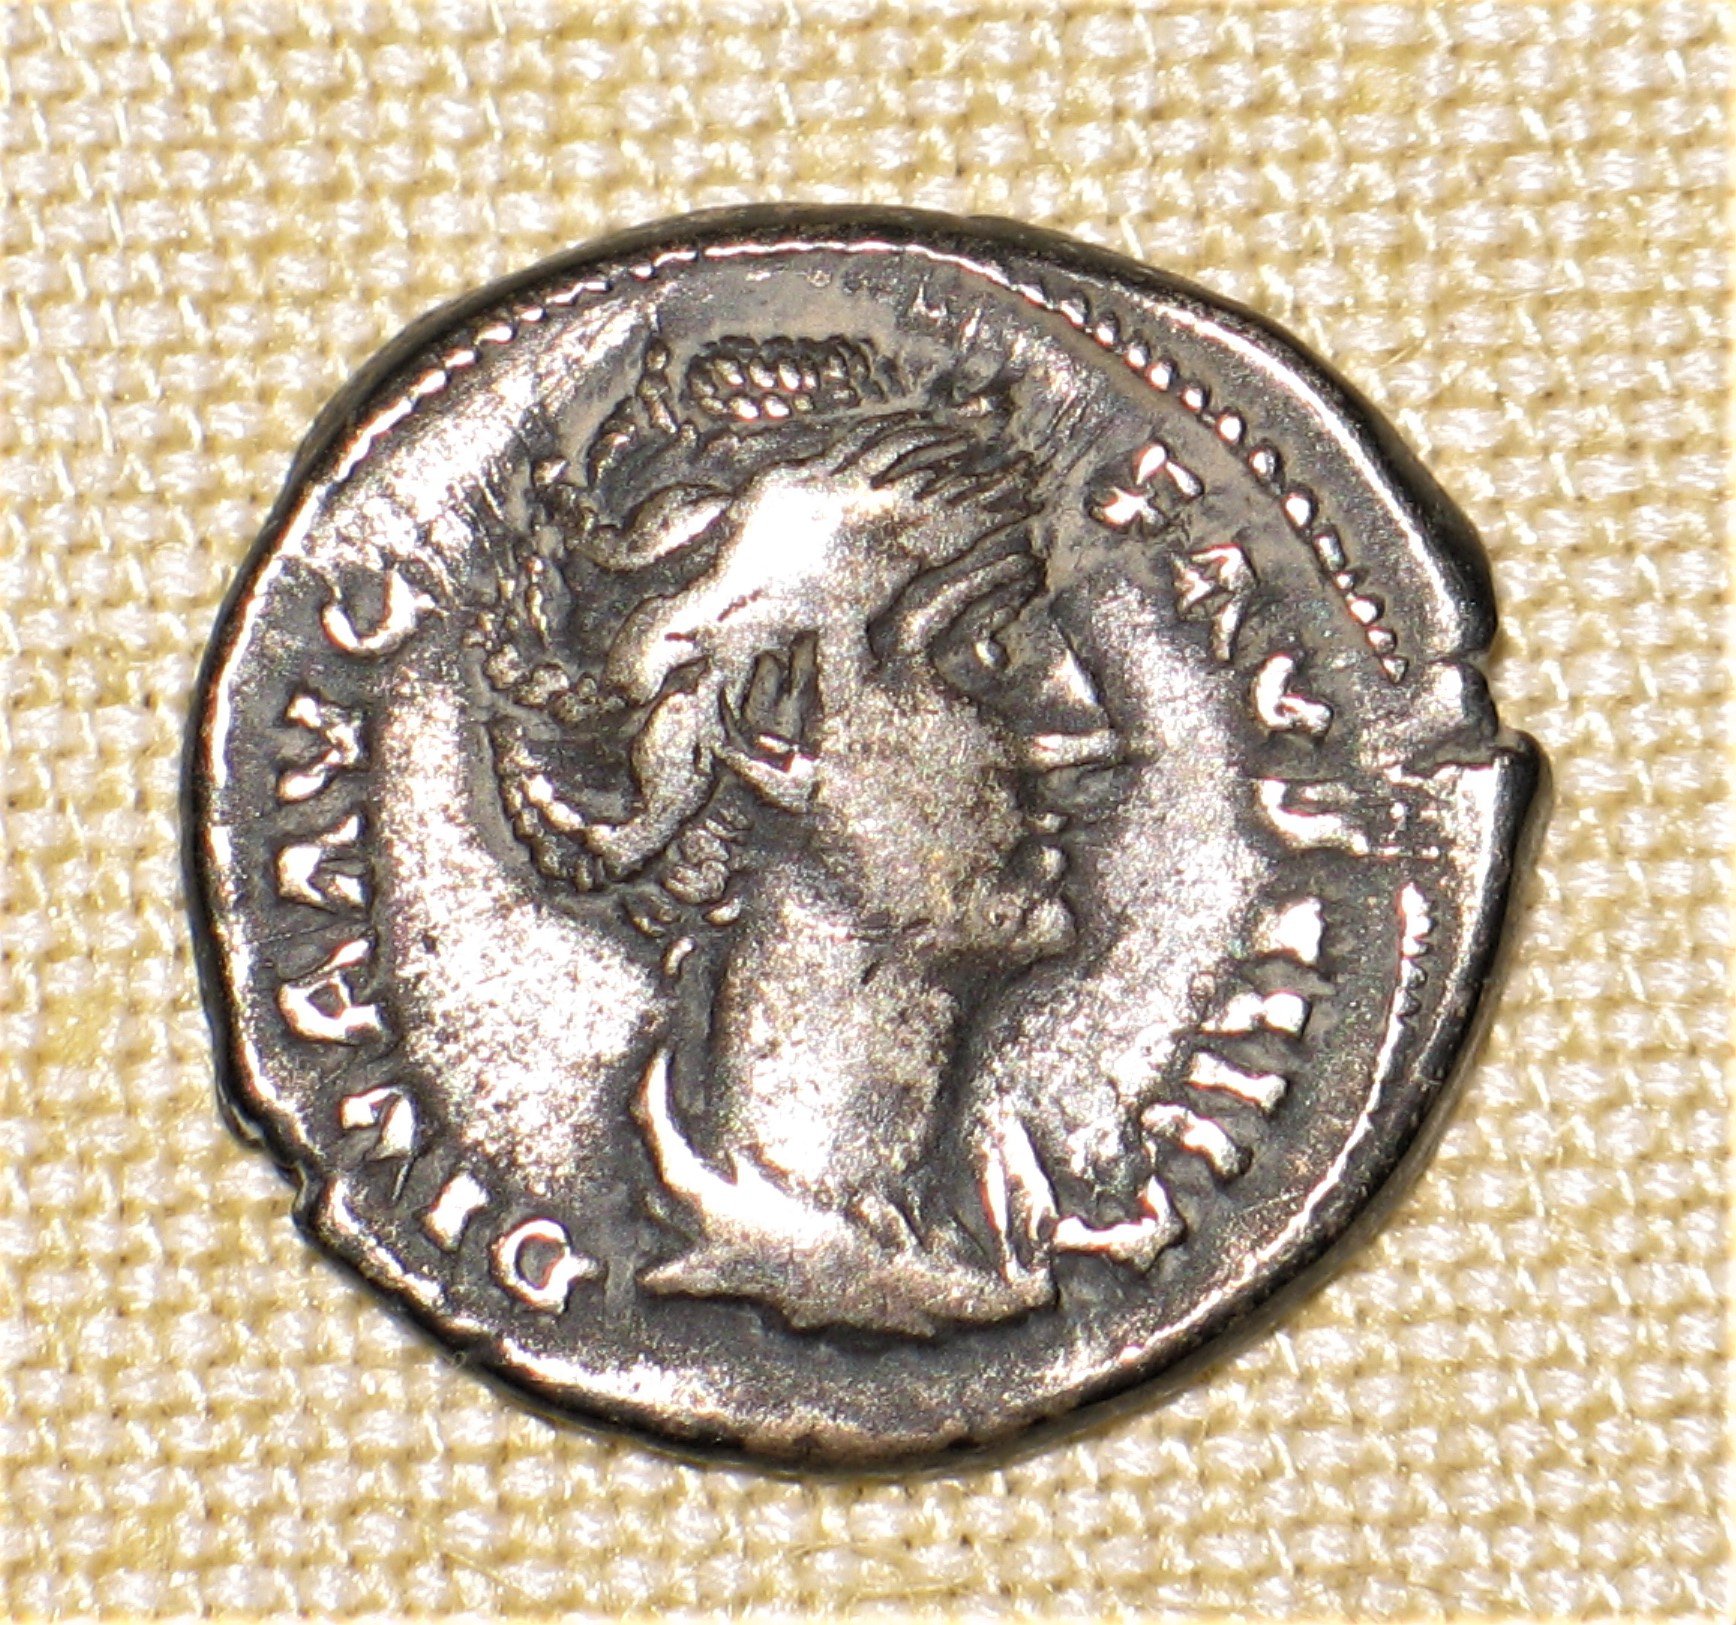 A Roman coin. (front side)